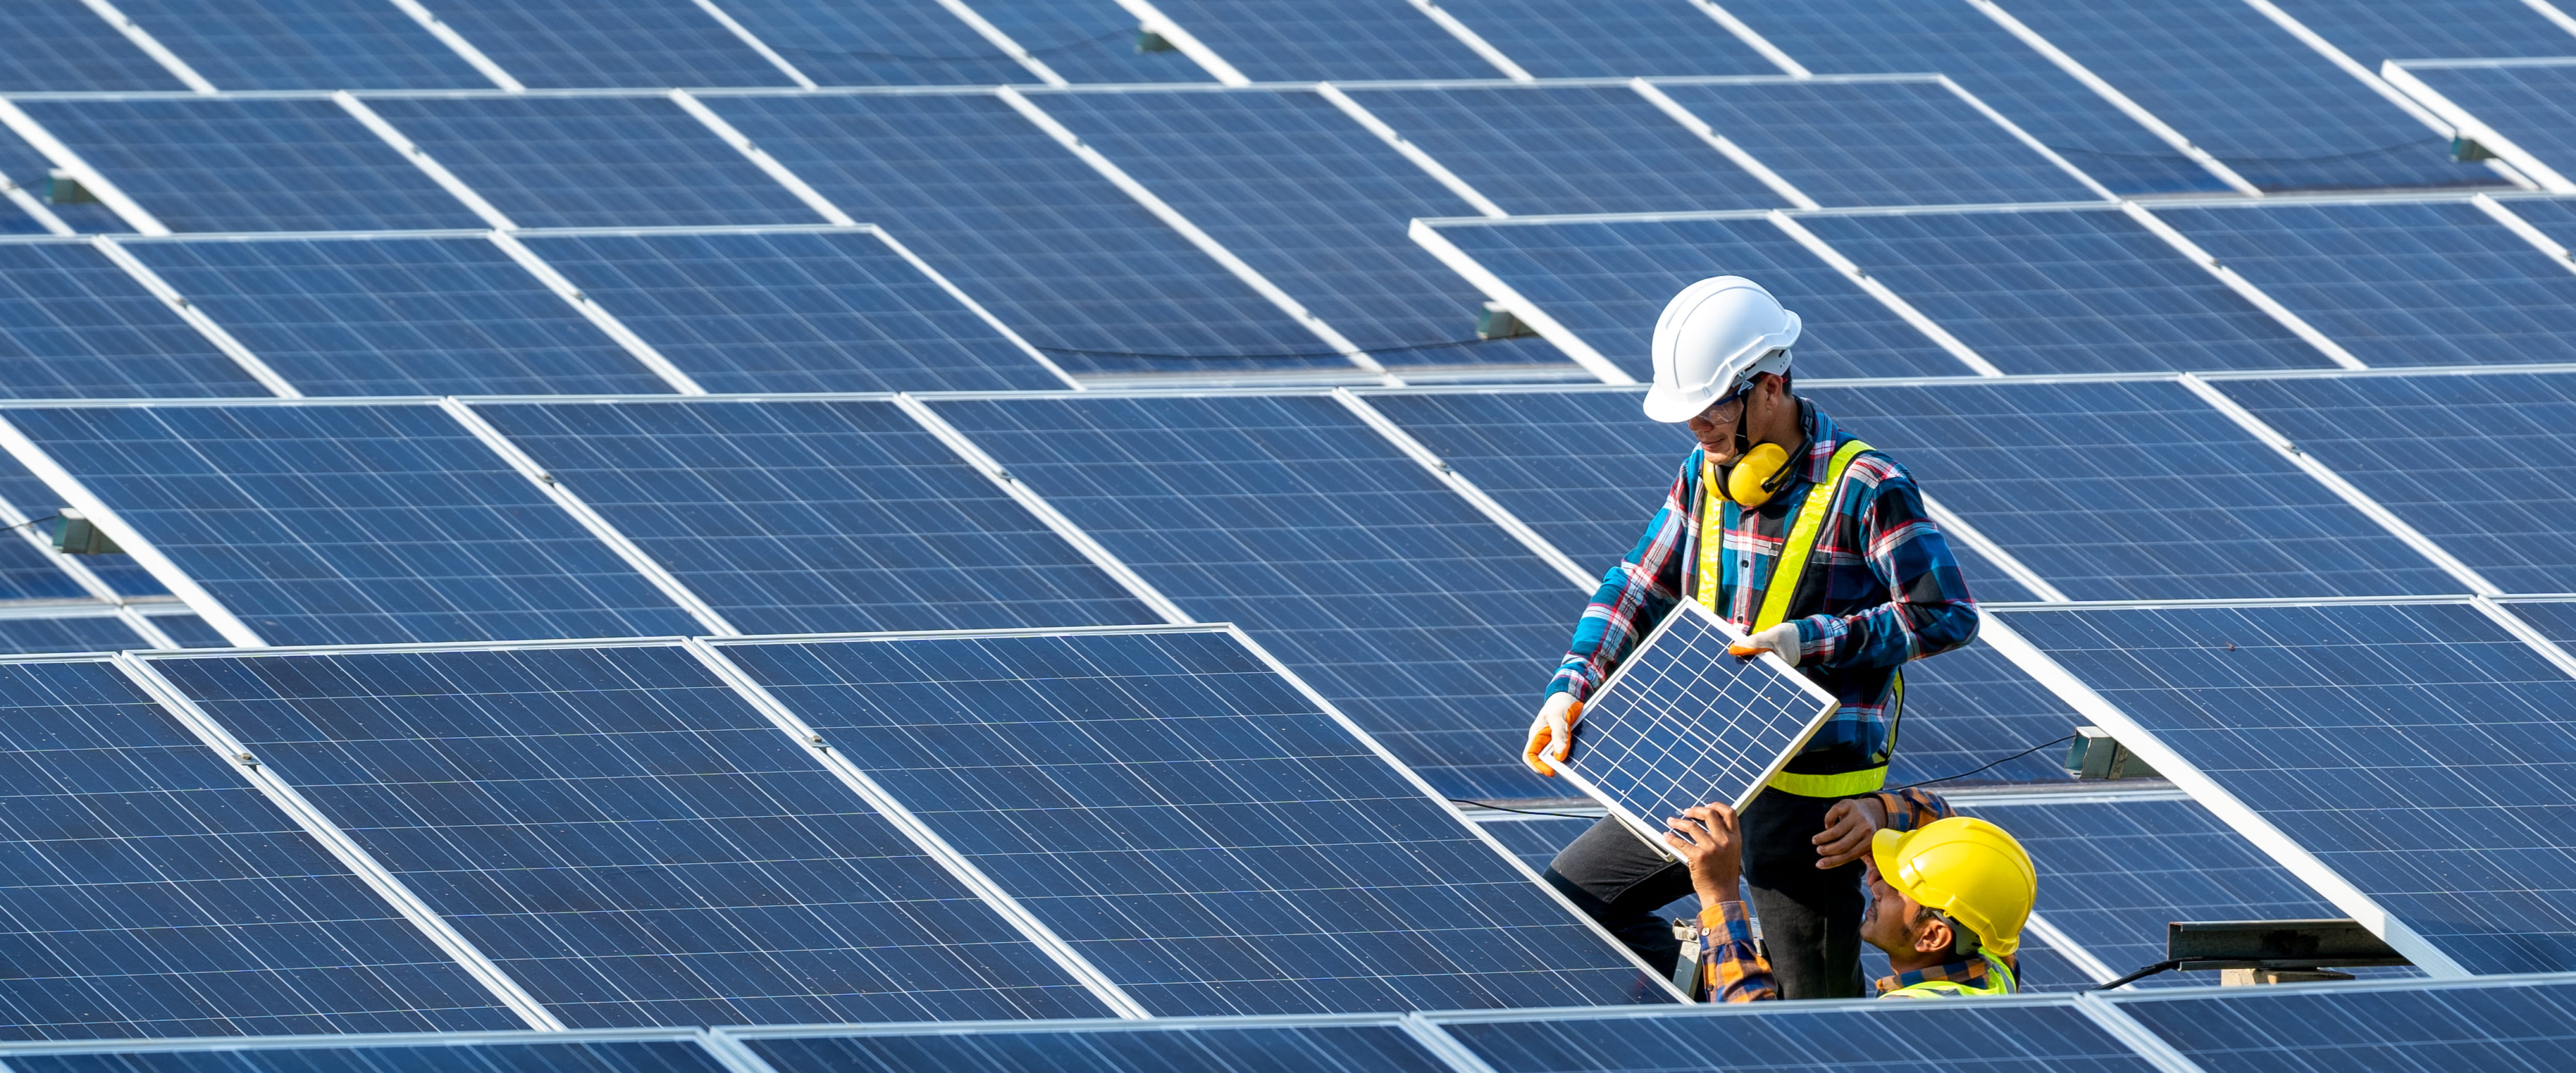 Engineer laying down solar panels to produce renewable energy